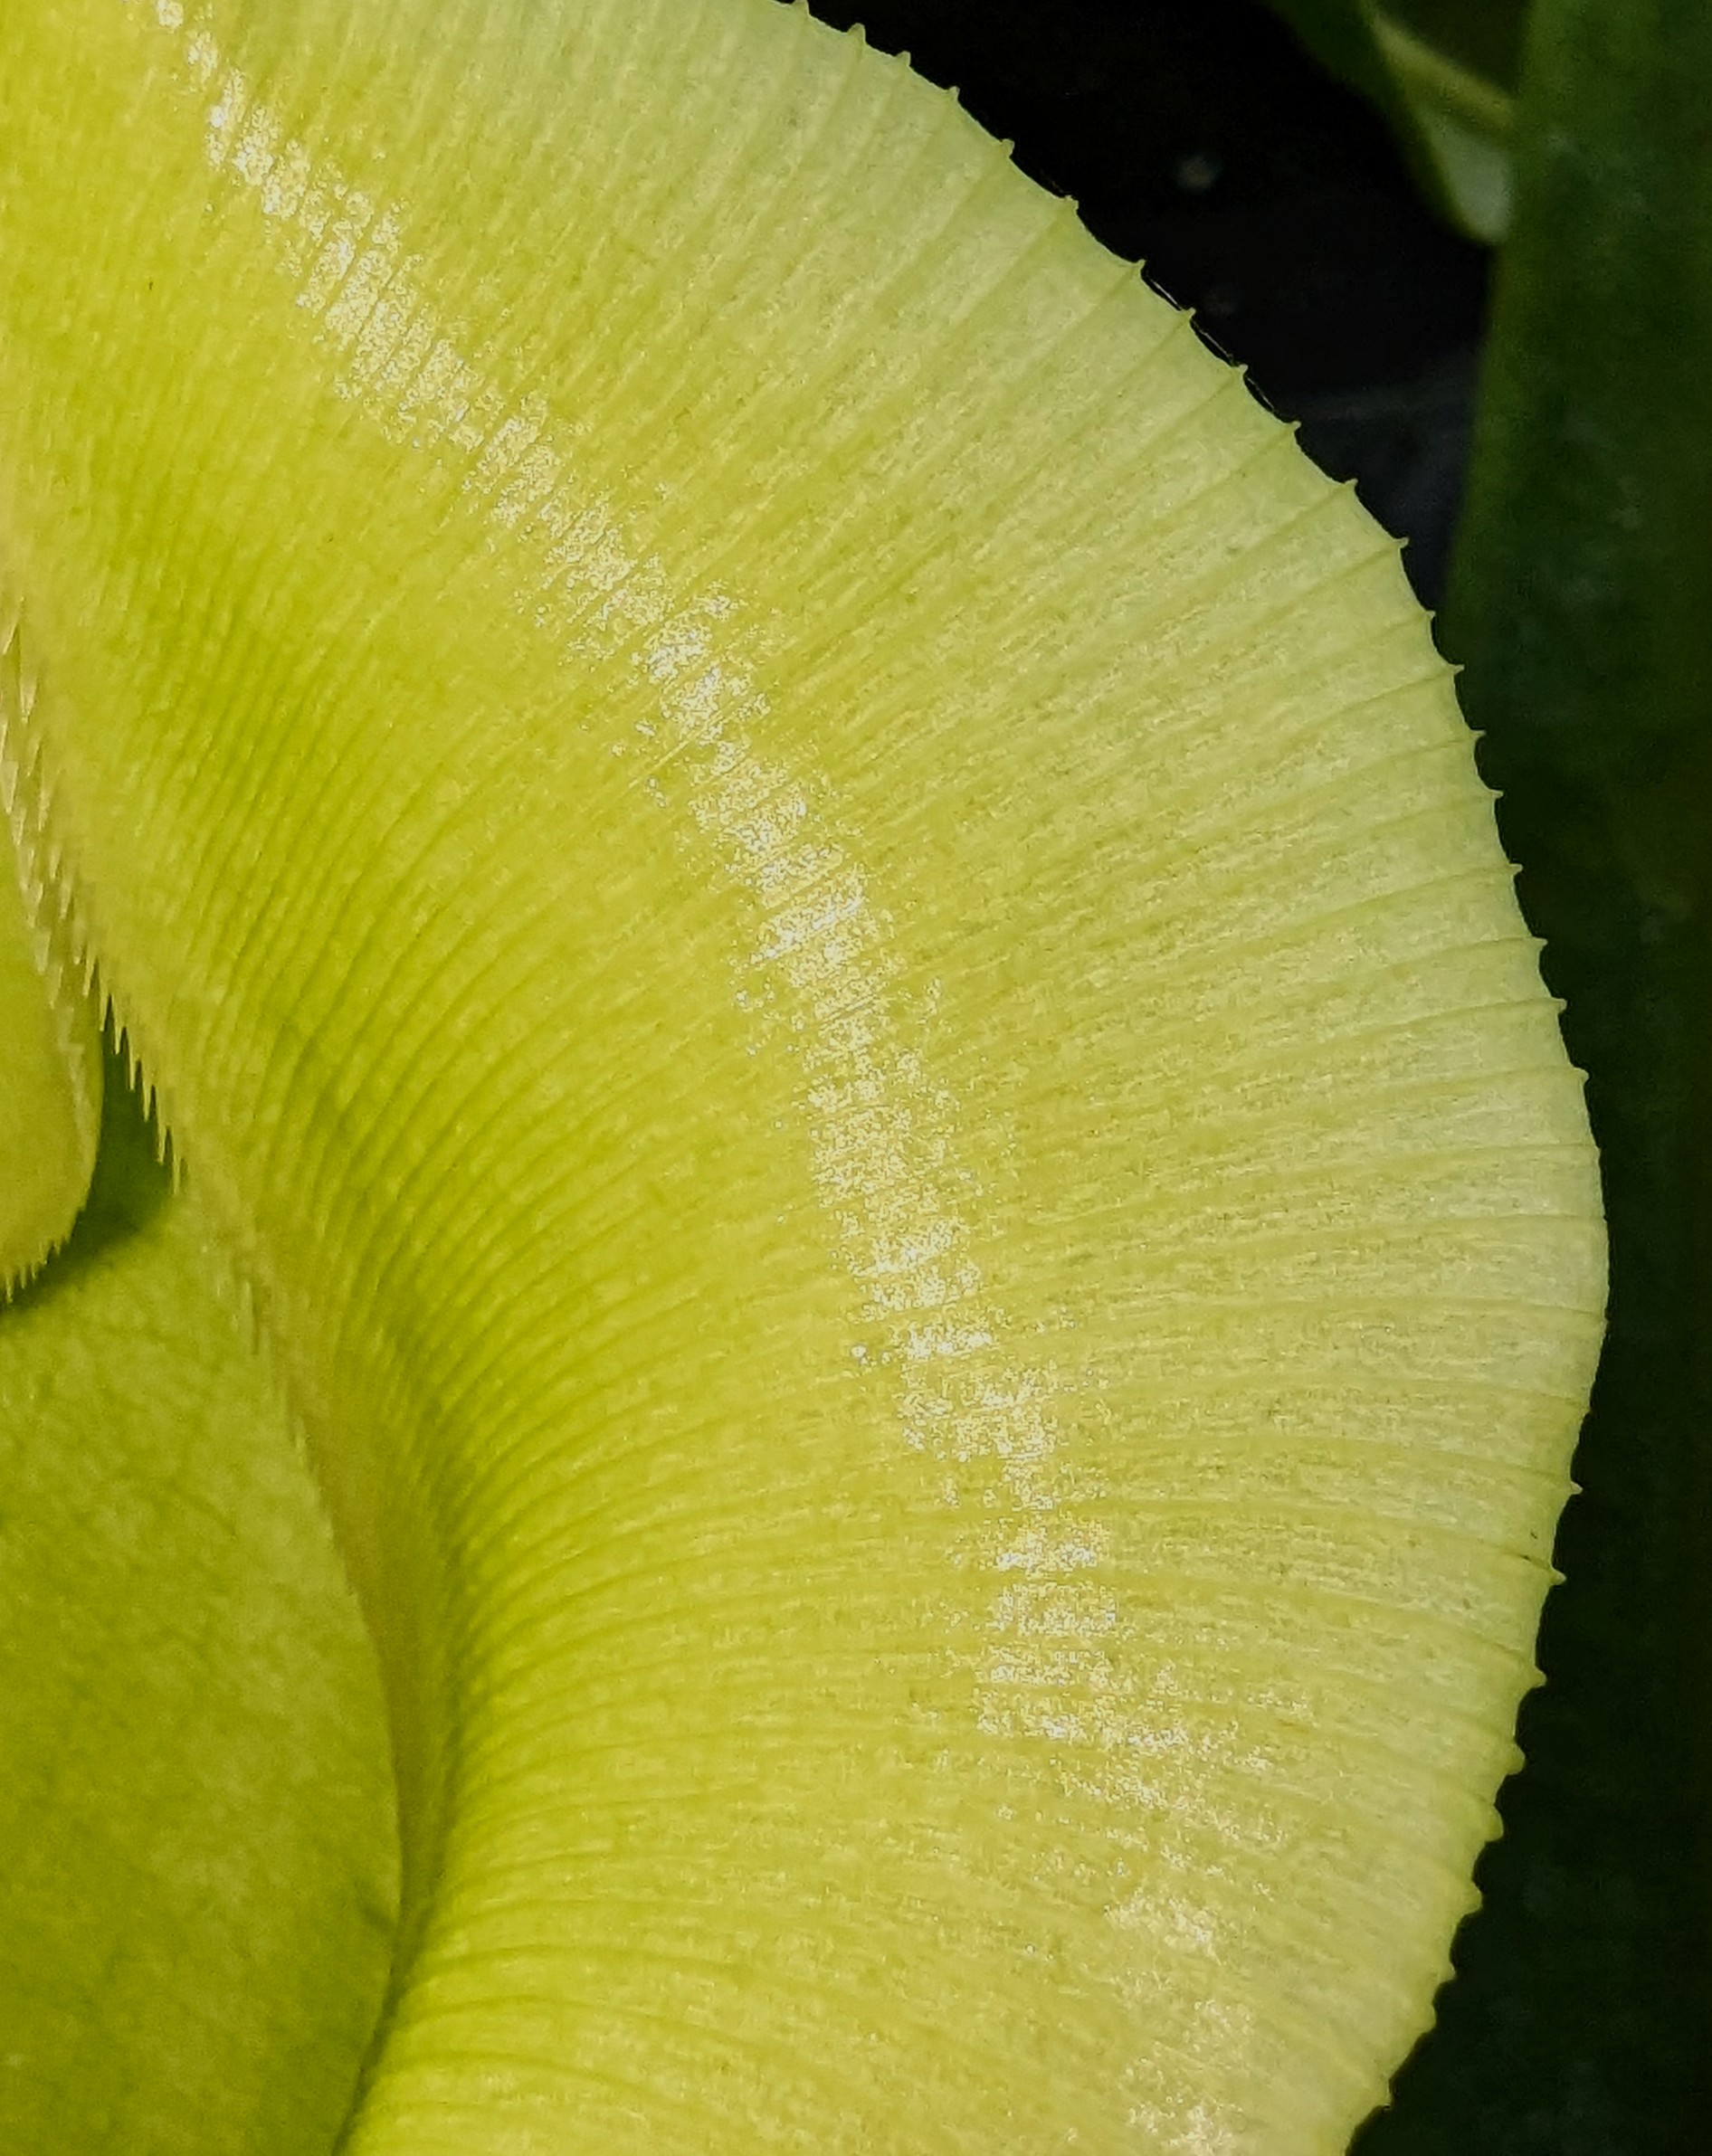 The deadly rim of the pitcher plant’s trap